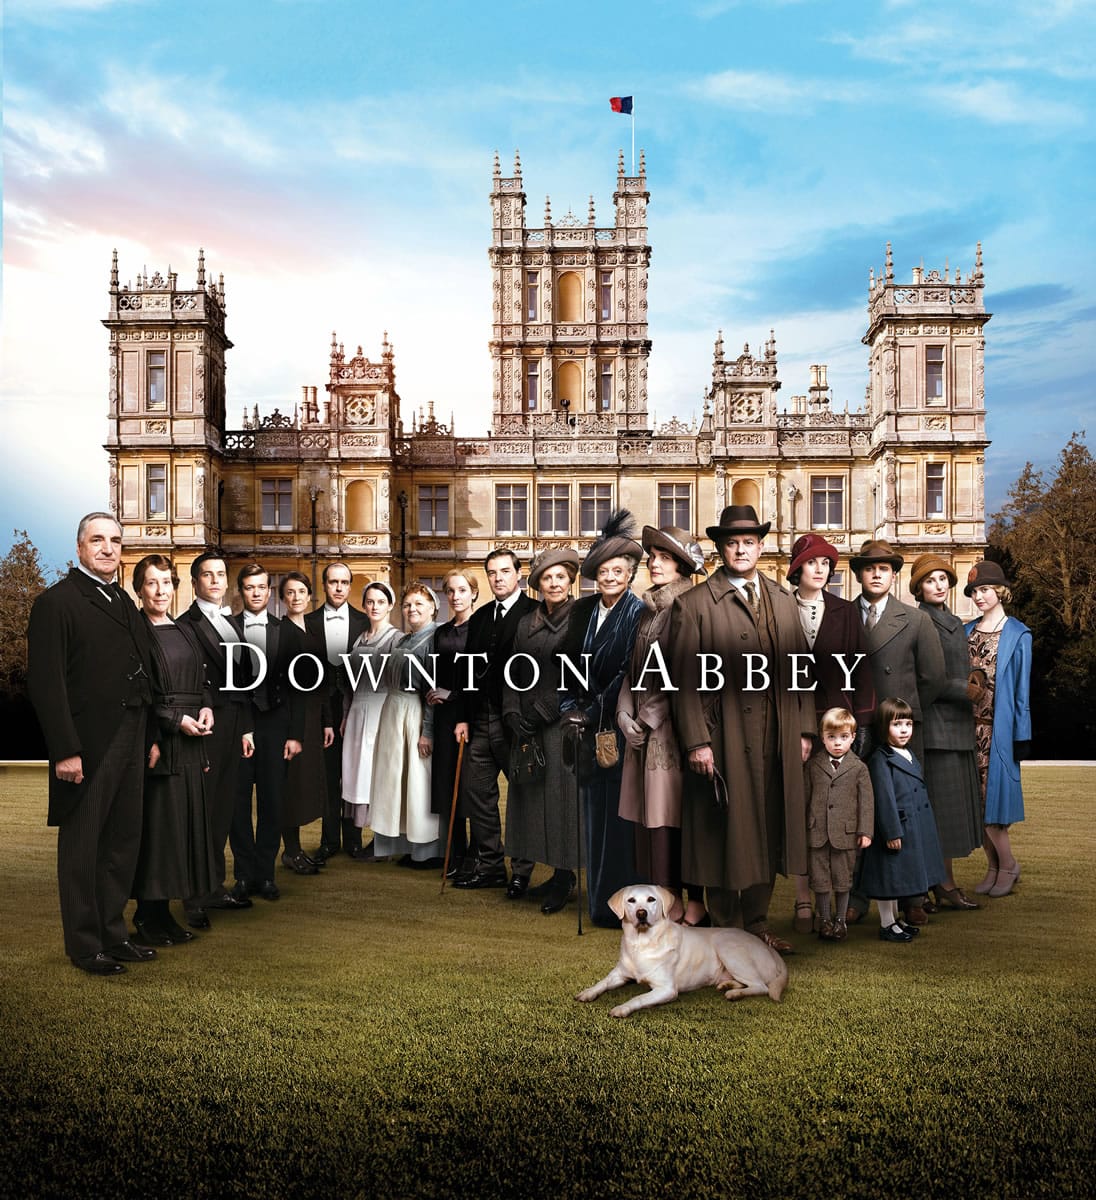 Nick Briggs/Carnival Films for Masterpiece
The eagerly awaited &quot;Downton Abbey&quot; Season 5 begins Sunday.